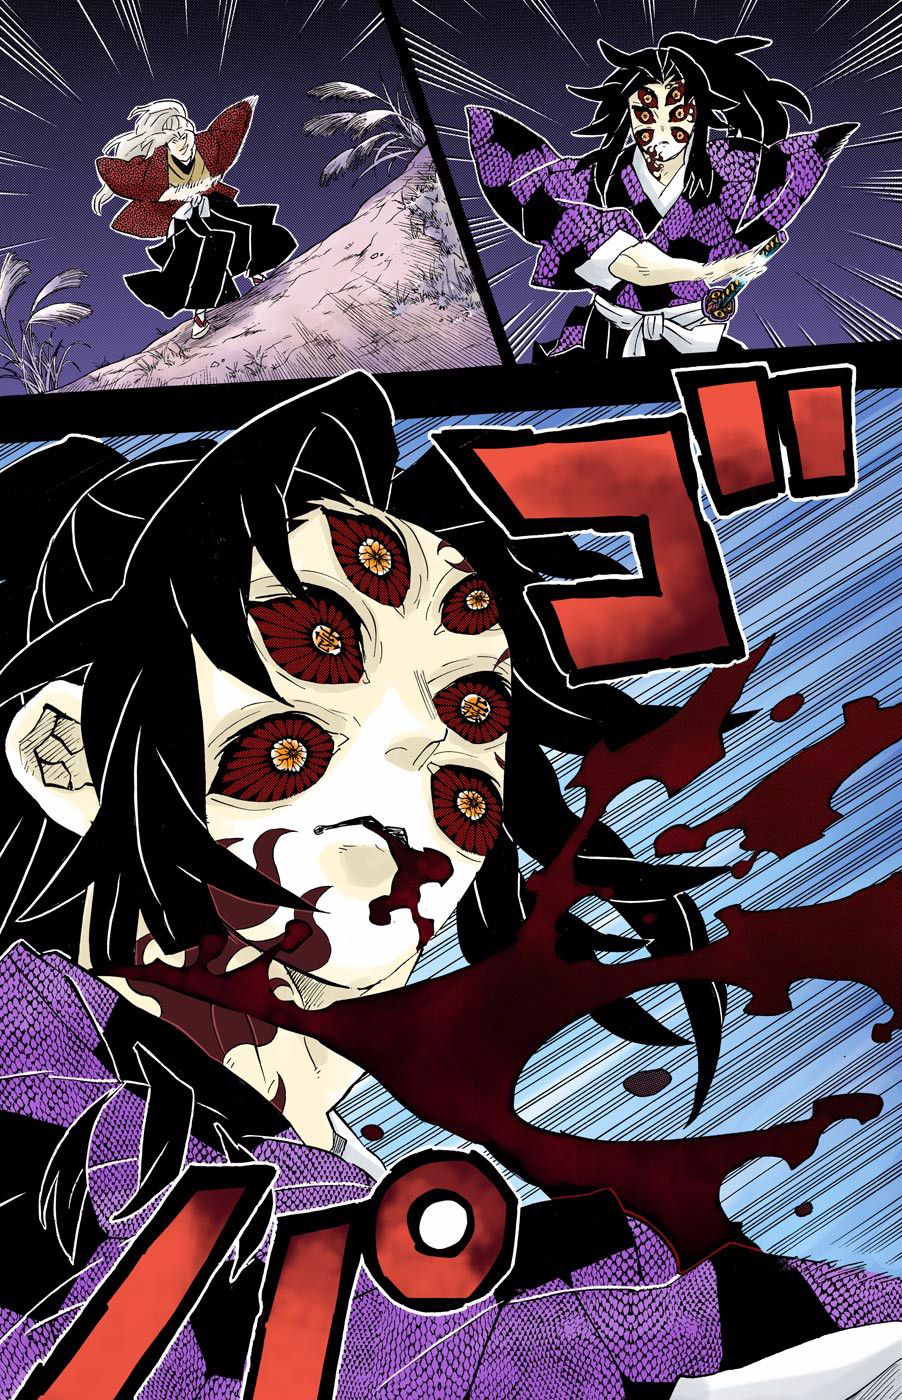 Tanjiro's shocking connection to Upper Moon 1 revealed in Demon